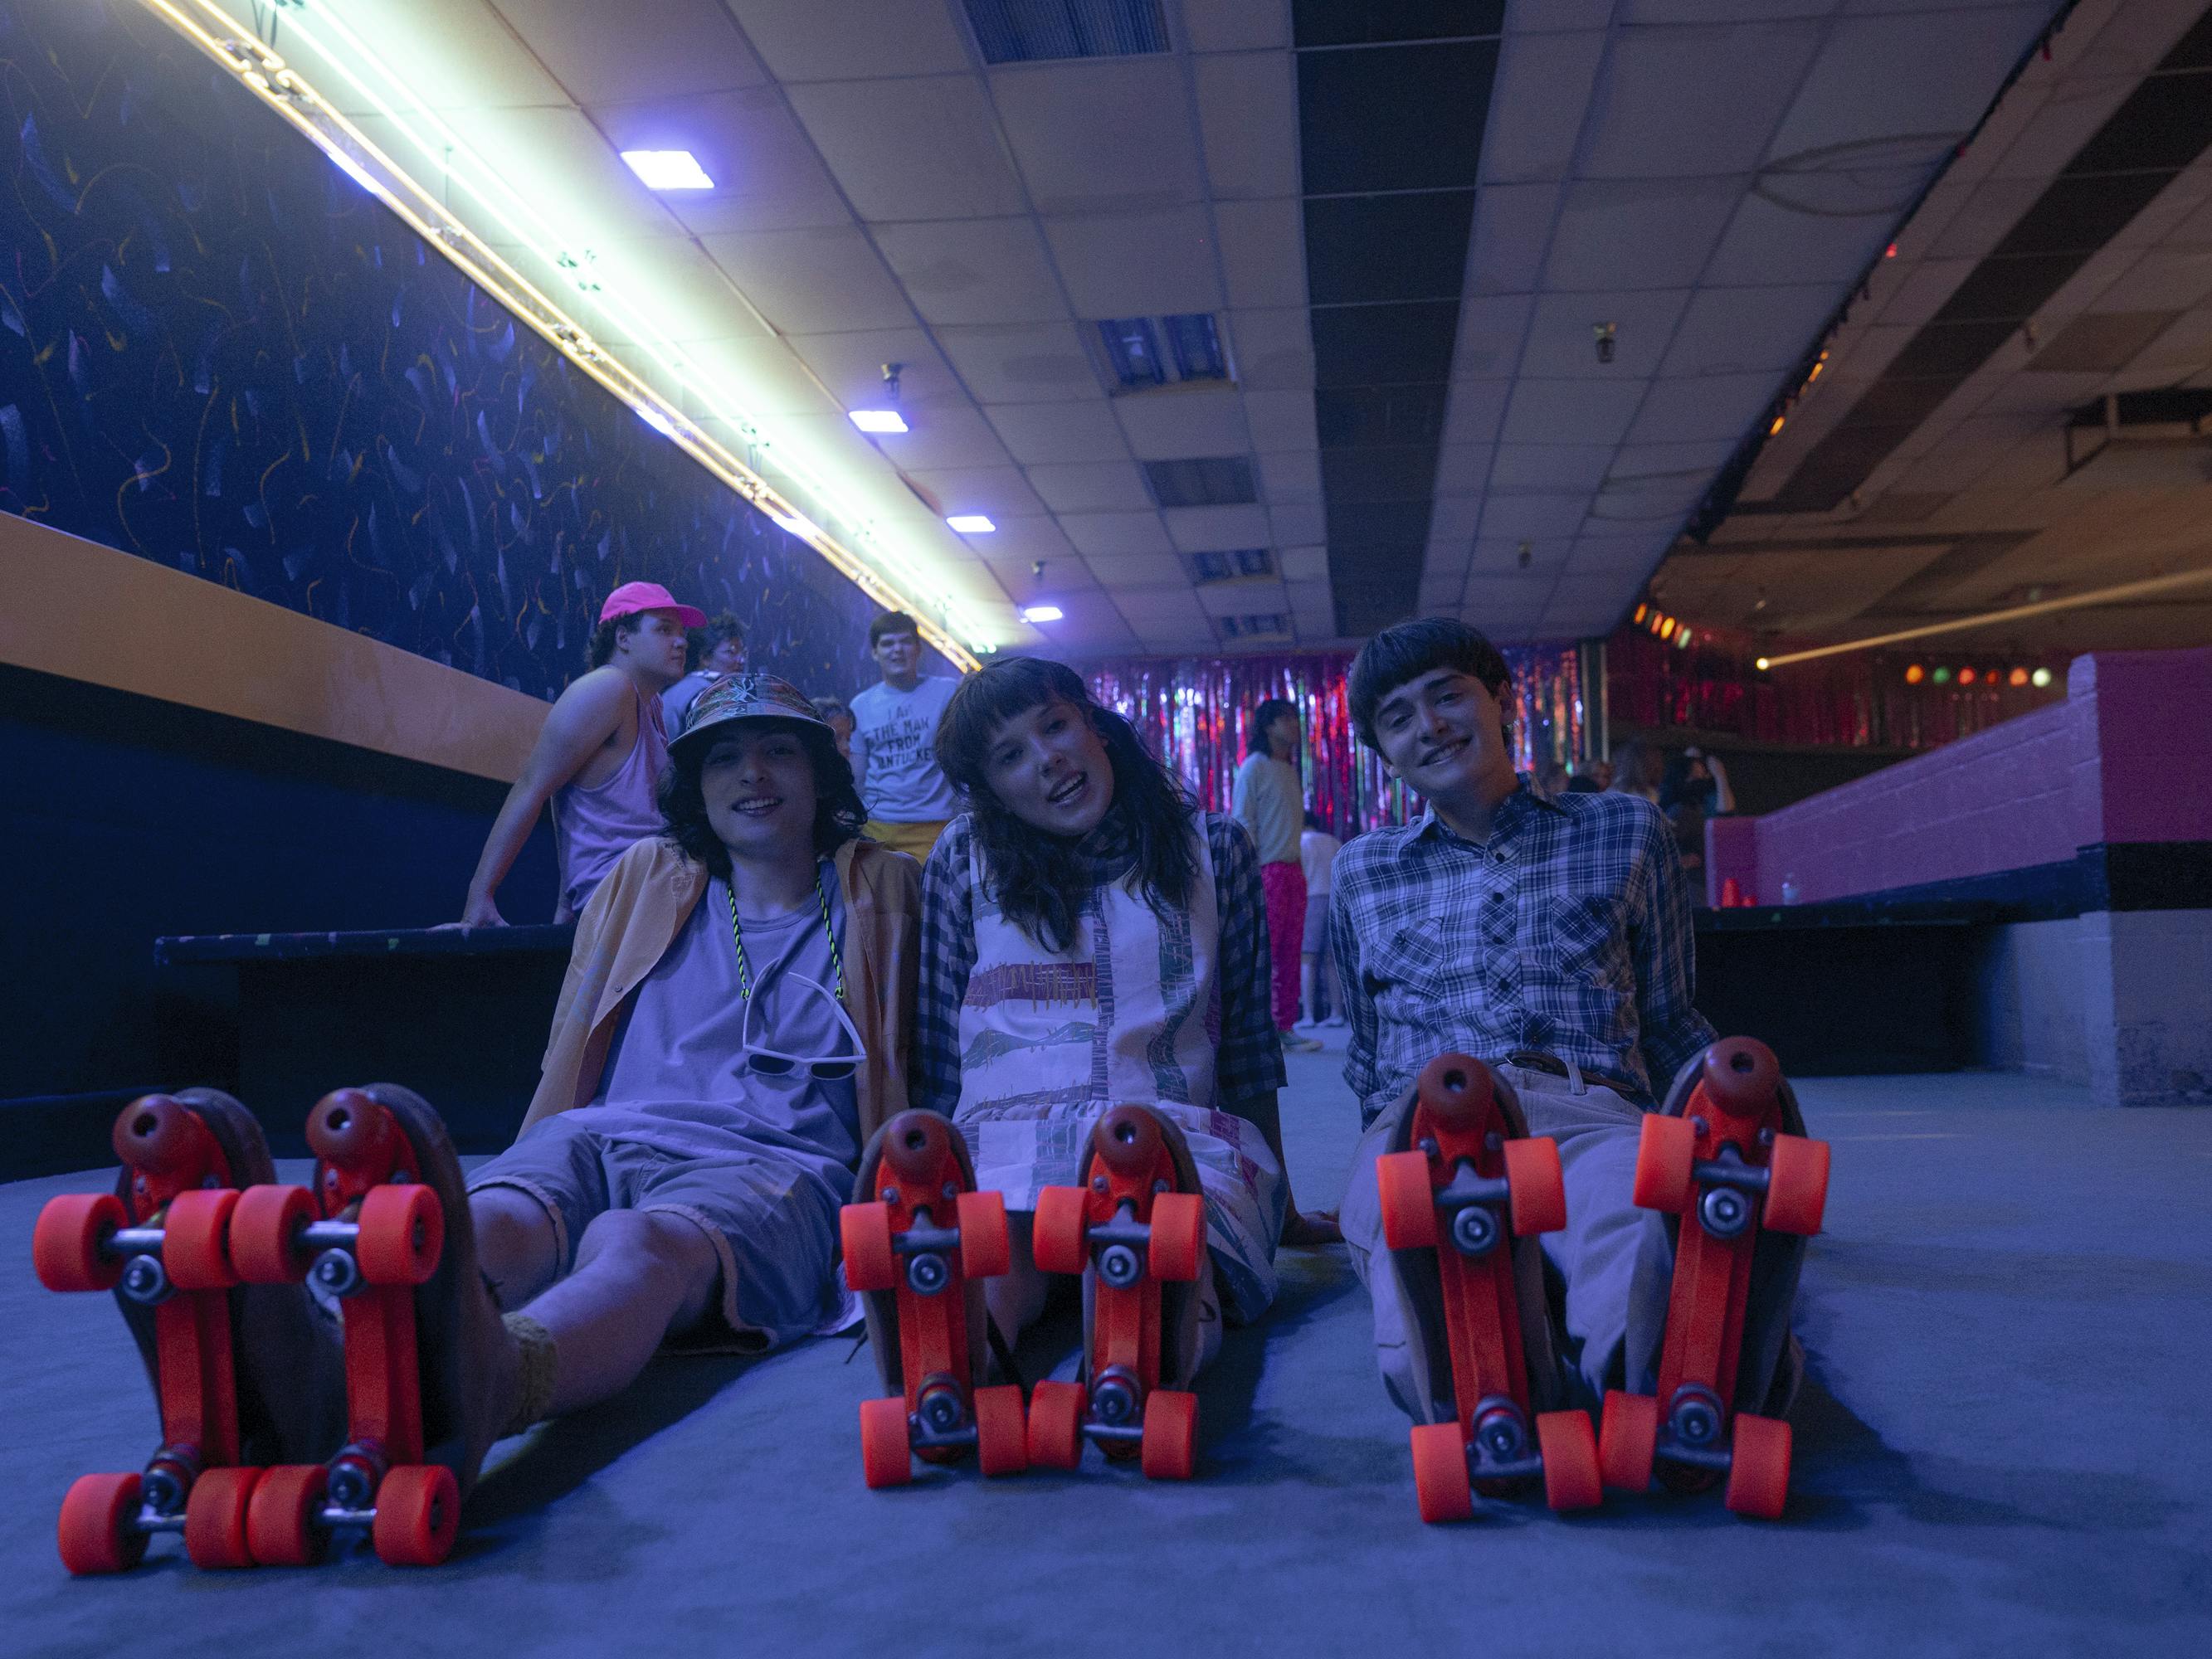 Mike Wheeler (Finn Wolfhard), Eleven (Millie Bobby Brown), and Will Byers (Noah Schnapp) show their roller skate clad feet.